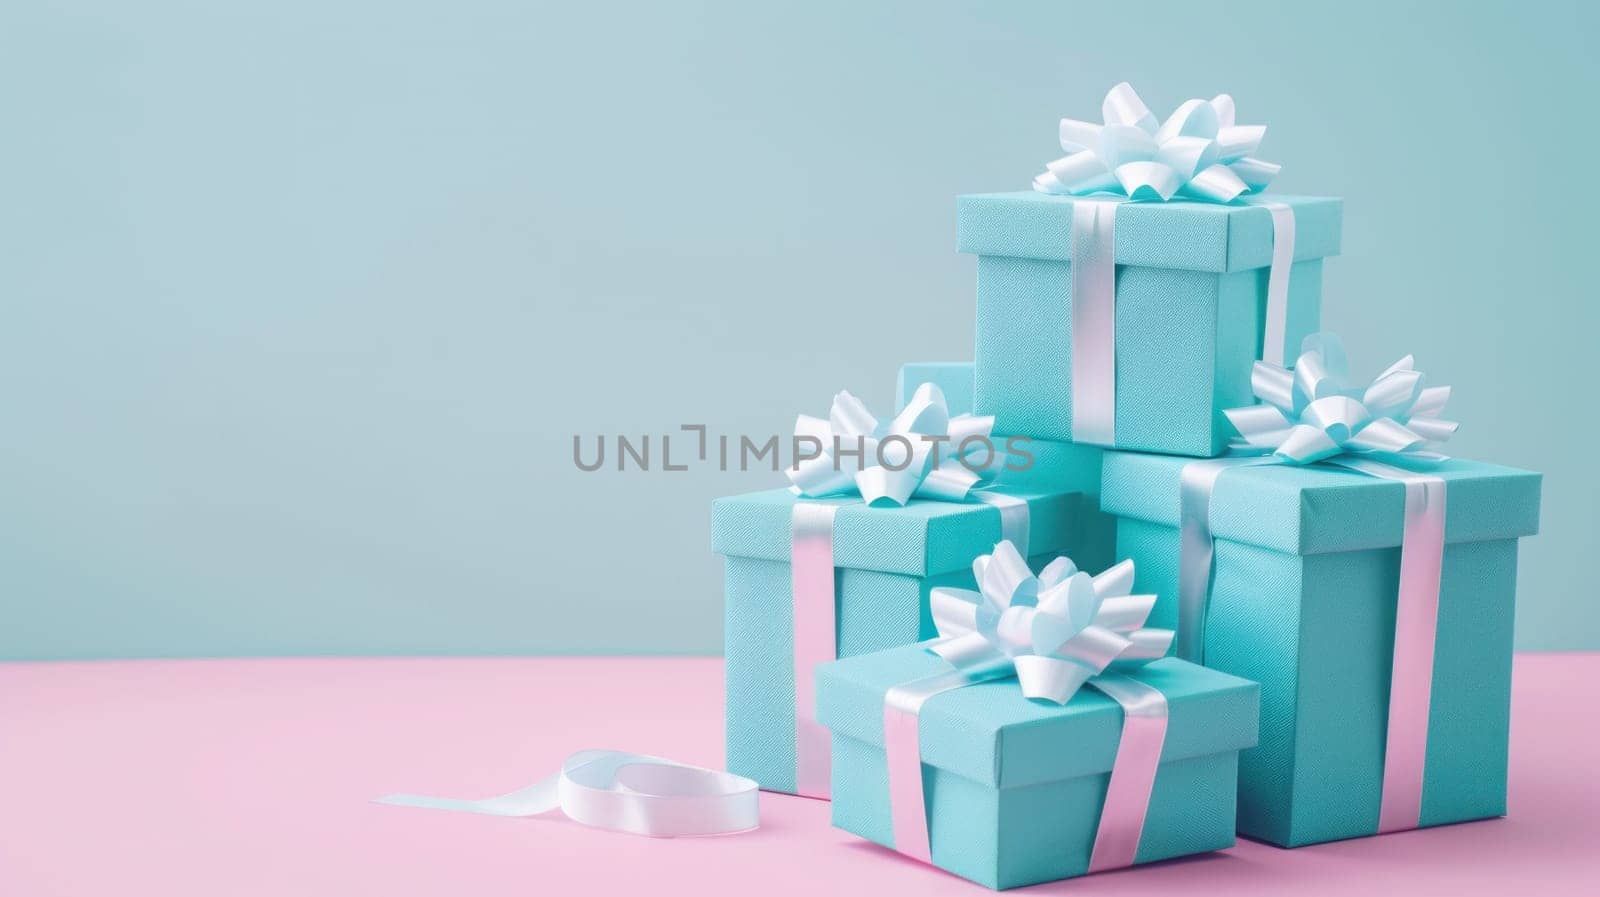 Blue gift boxes with white bows on pink and blue background for celebrating special occasions by Vichizh